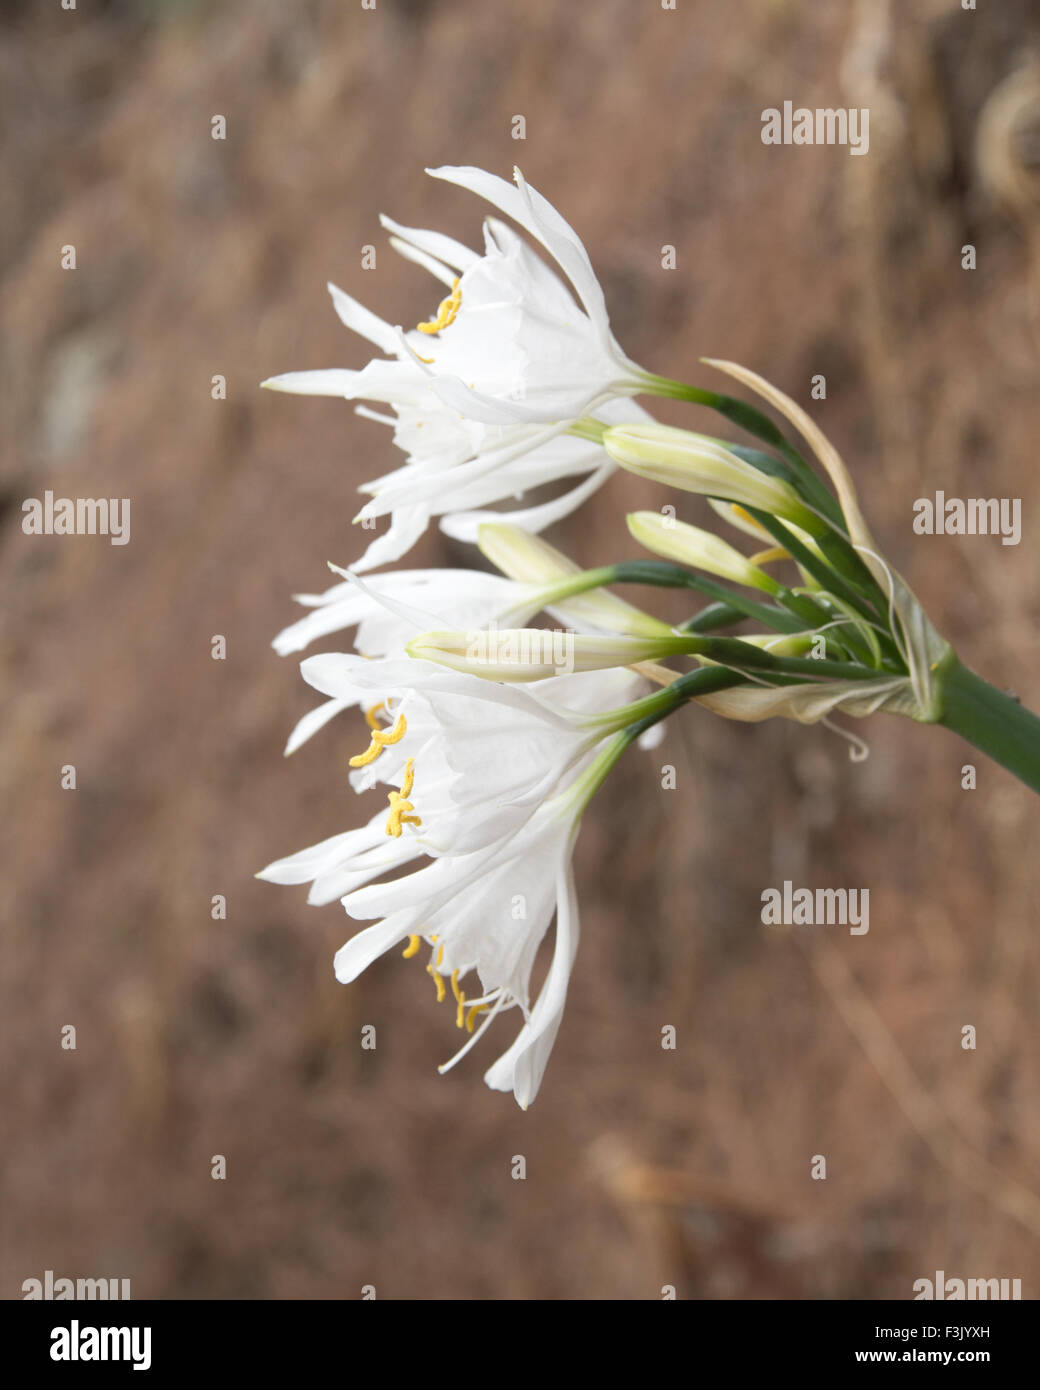 Flowering Pancratium canariense or the Canary Sea Daffodil flowering on old pine needles background Stock Photo